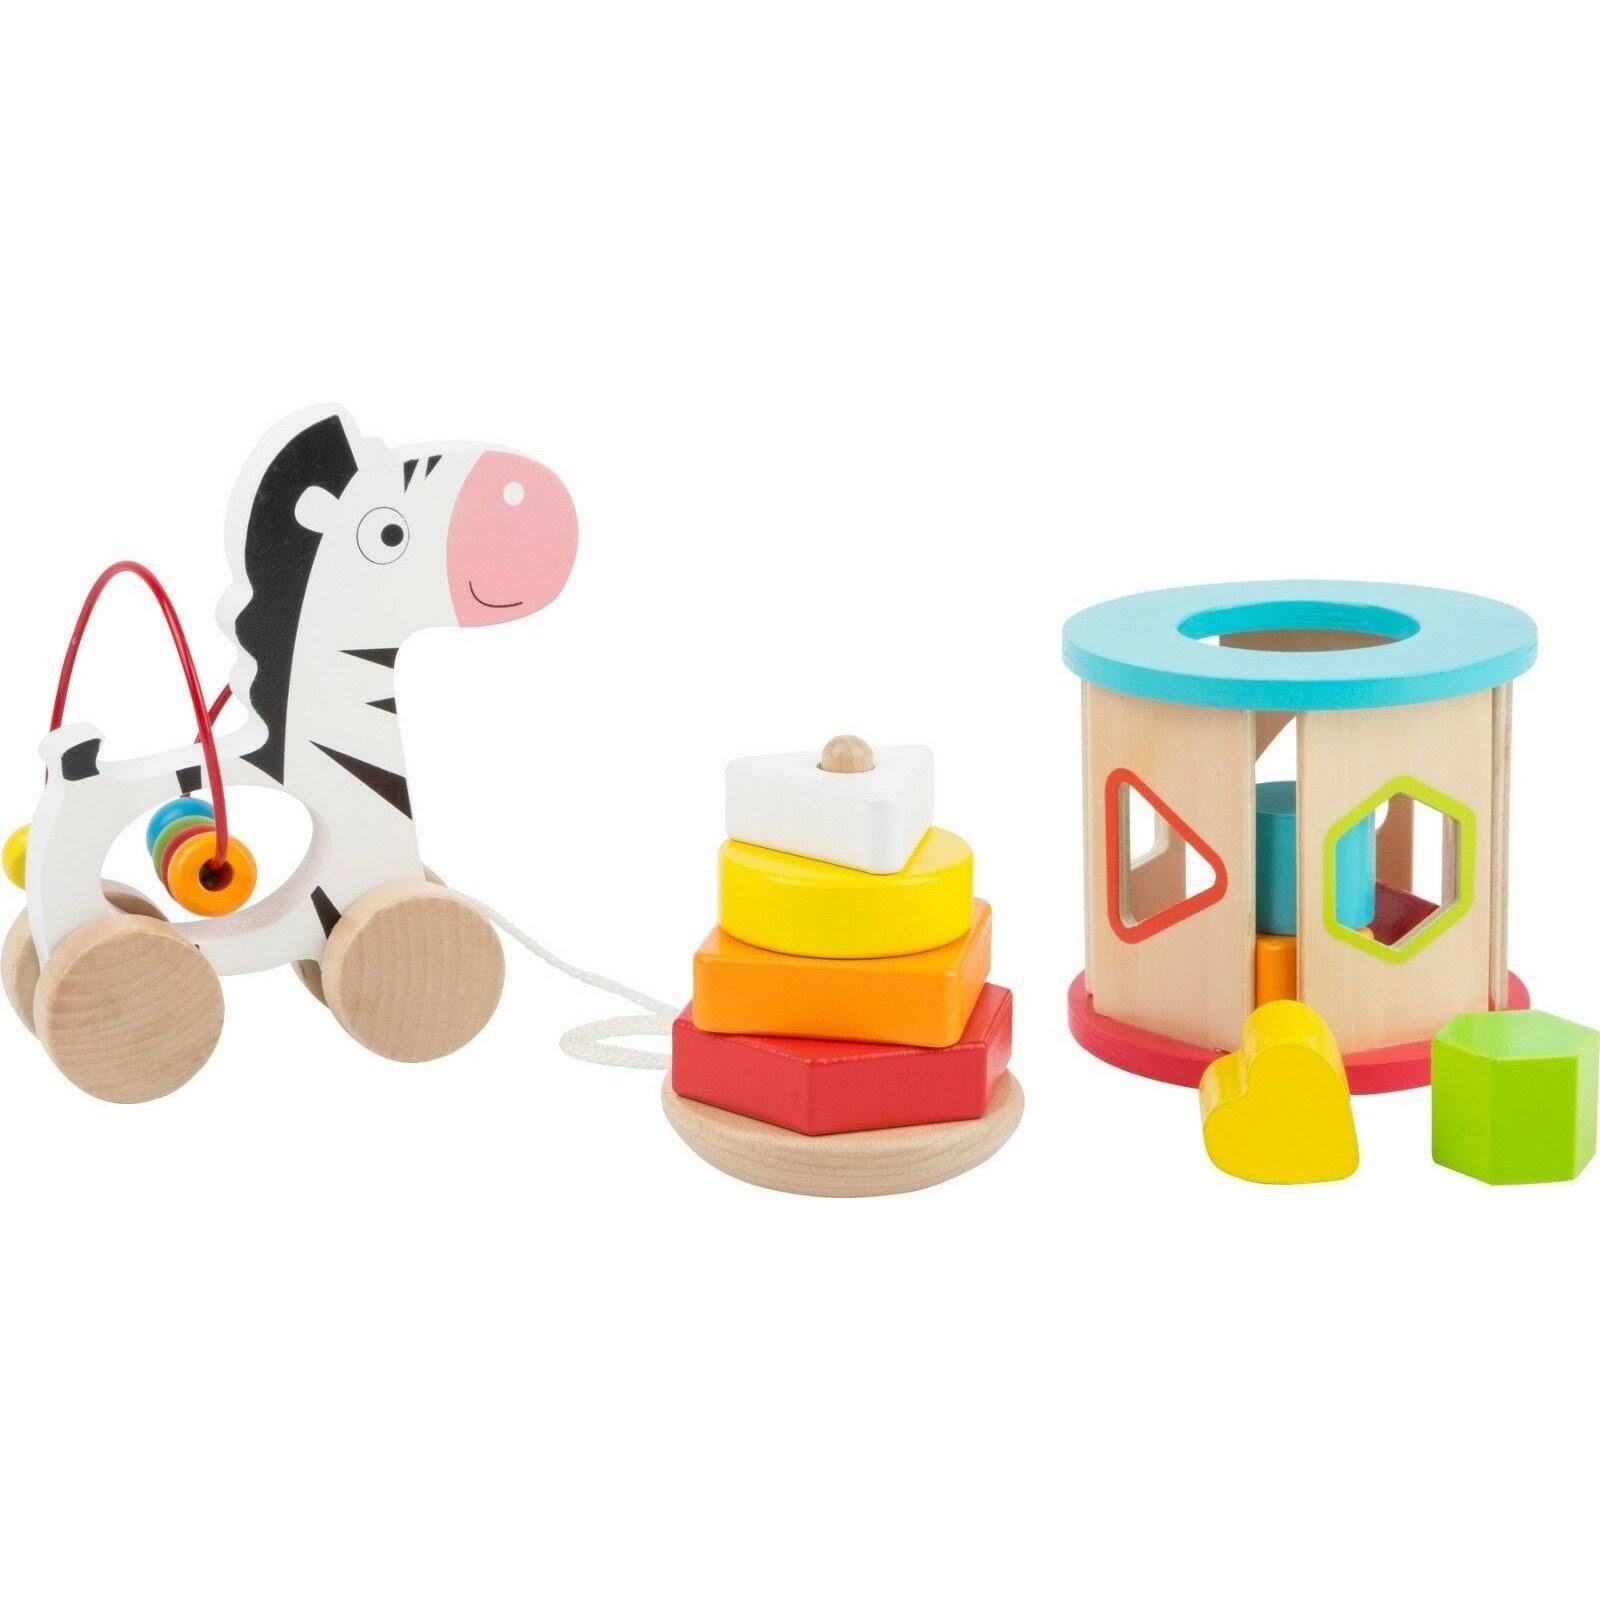 Small Foot Wooden Zebra Toy Play Set - 17cm